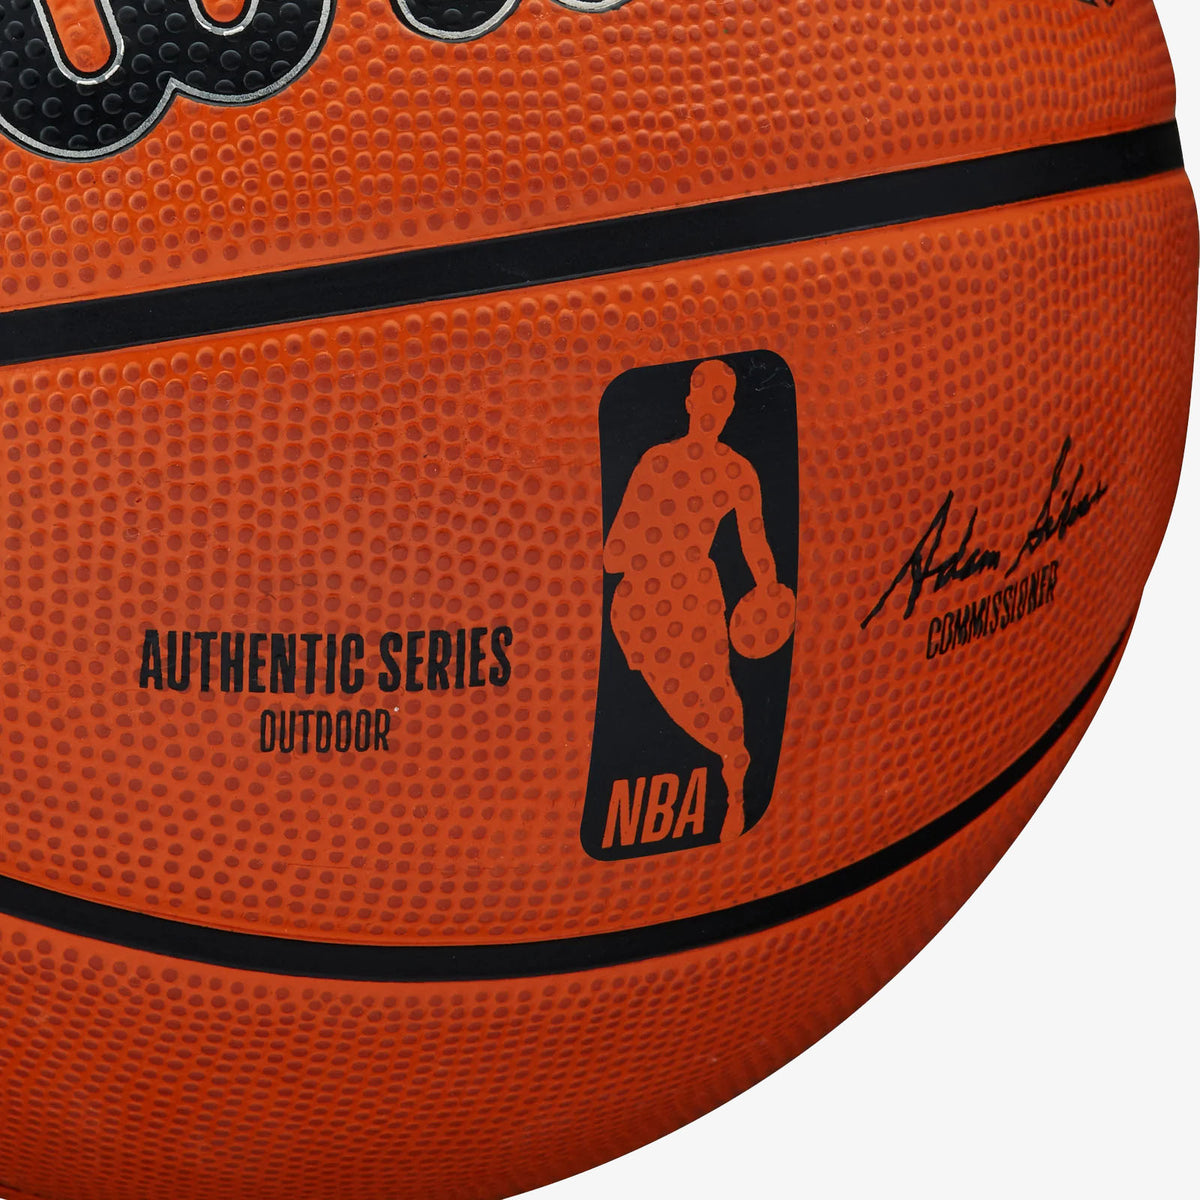 NBA Authentic Series Outdoor Basketball - Size 5